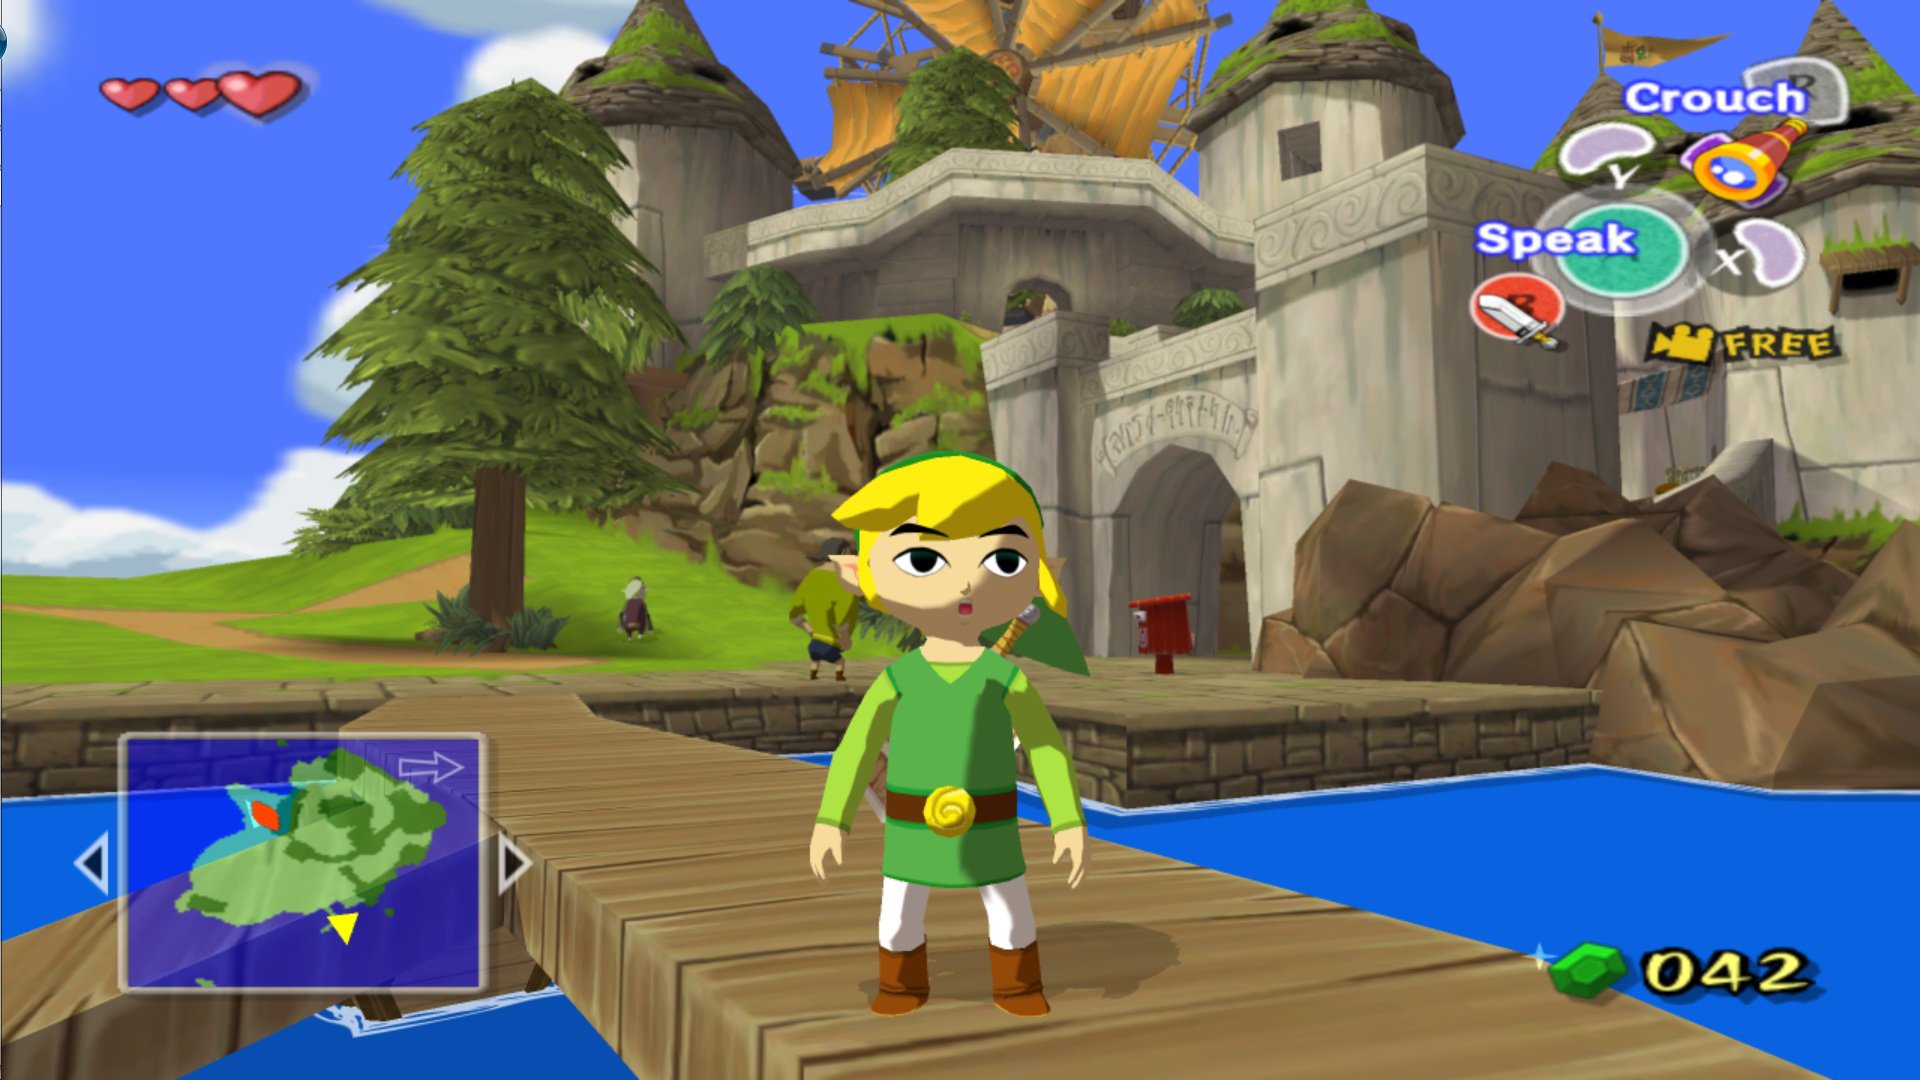 The Legend Of Zelda: The Wind Waker Backgrounds, Compatible - PC, Mobile, Gadgets| 1920x1080 px